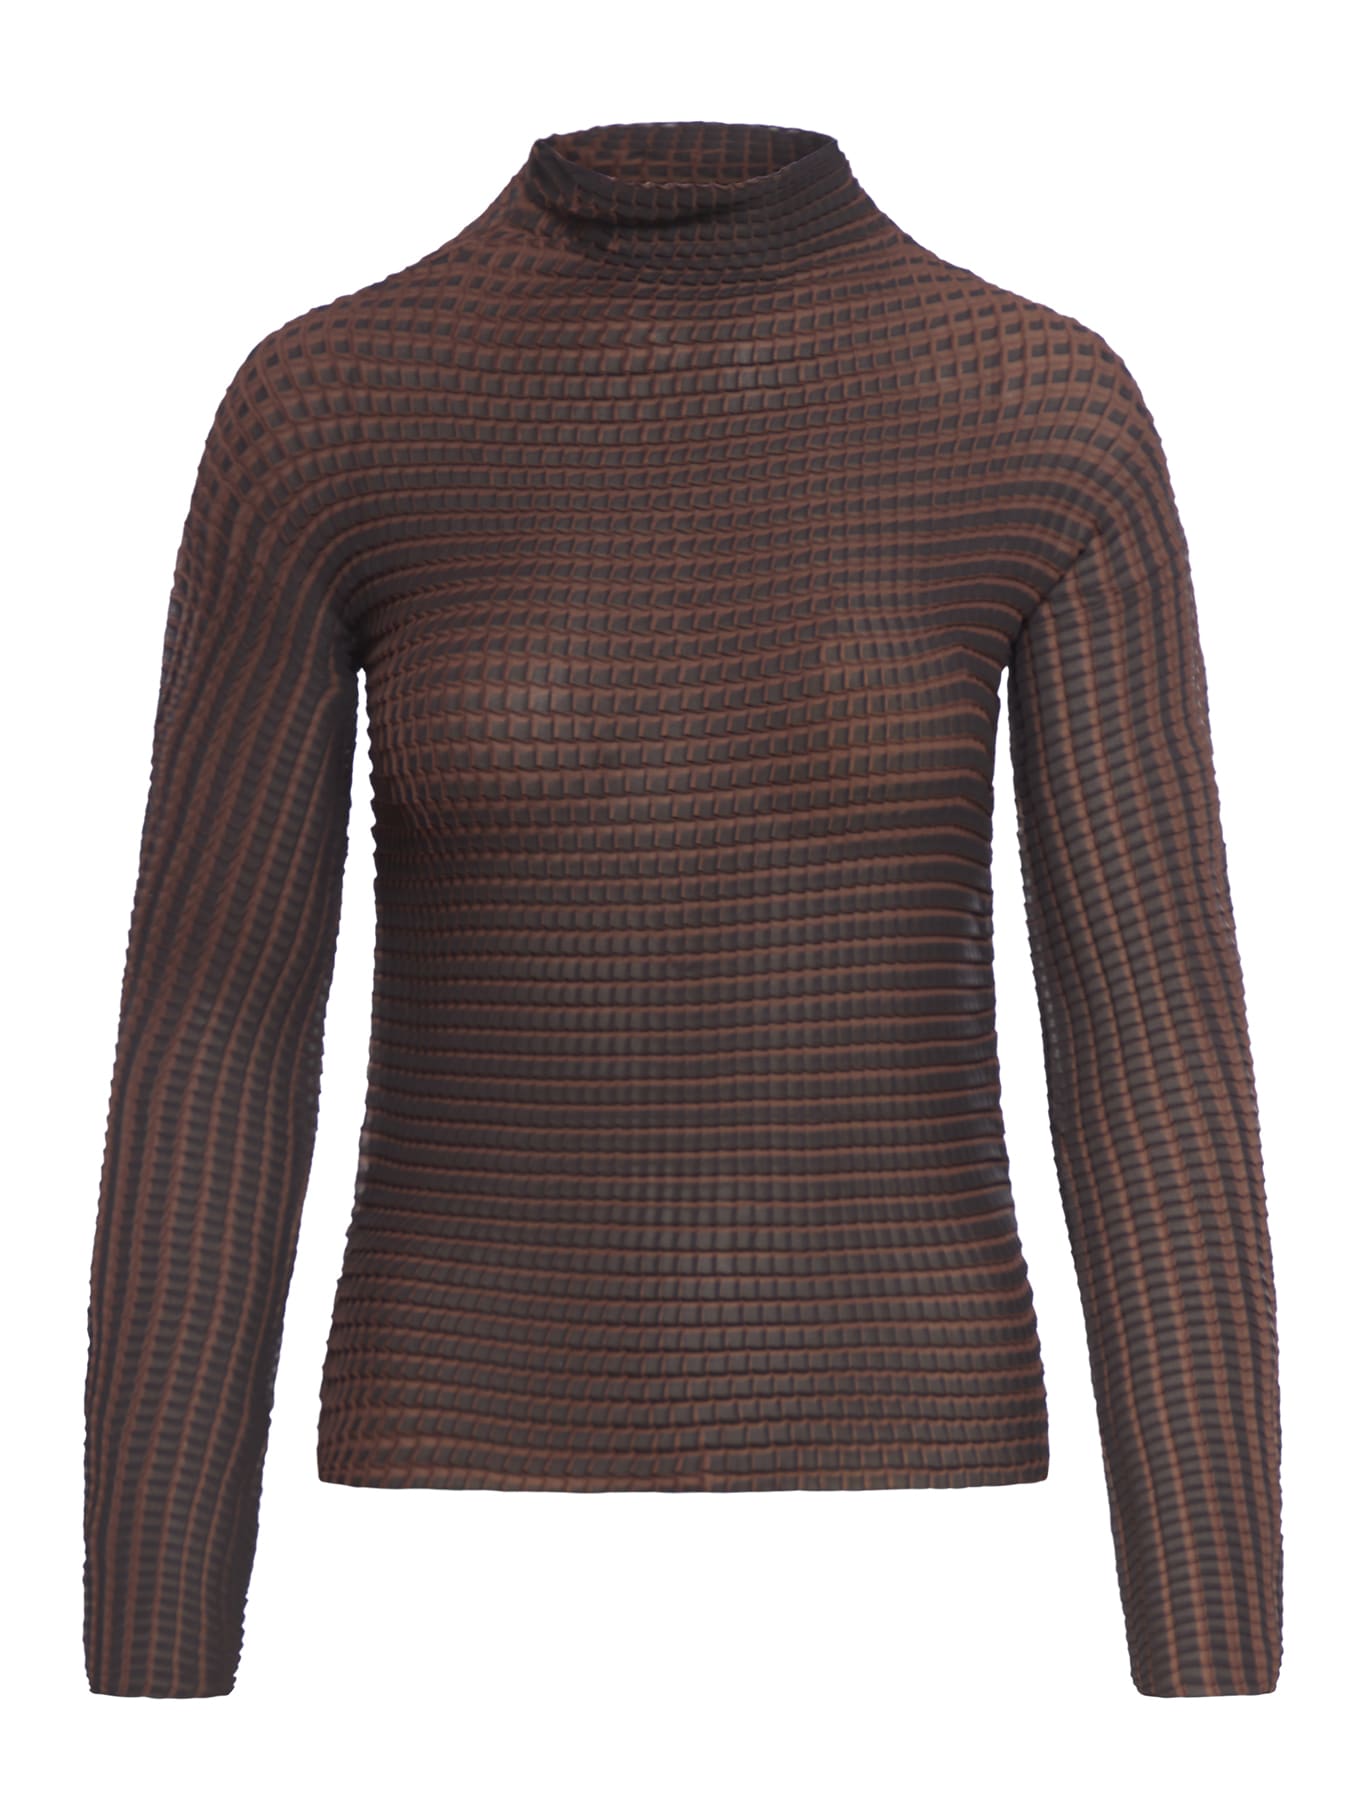 SUNNEI THERMO FRISE` LONGSLEEVE TOP